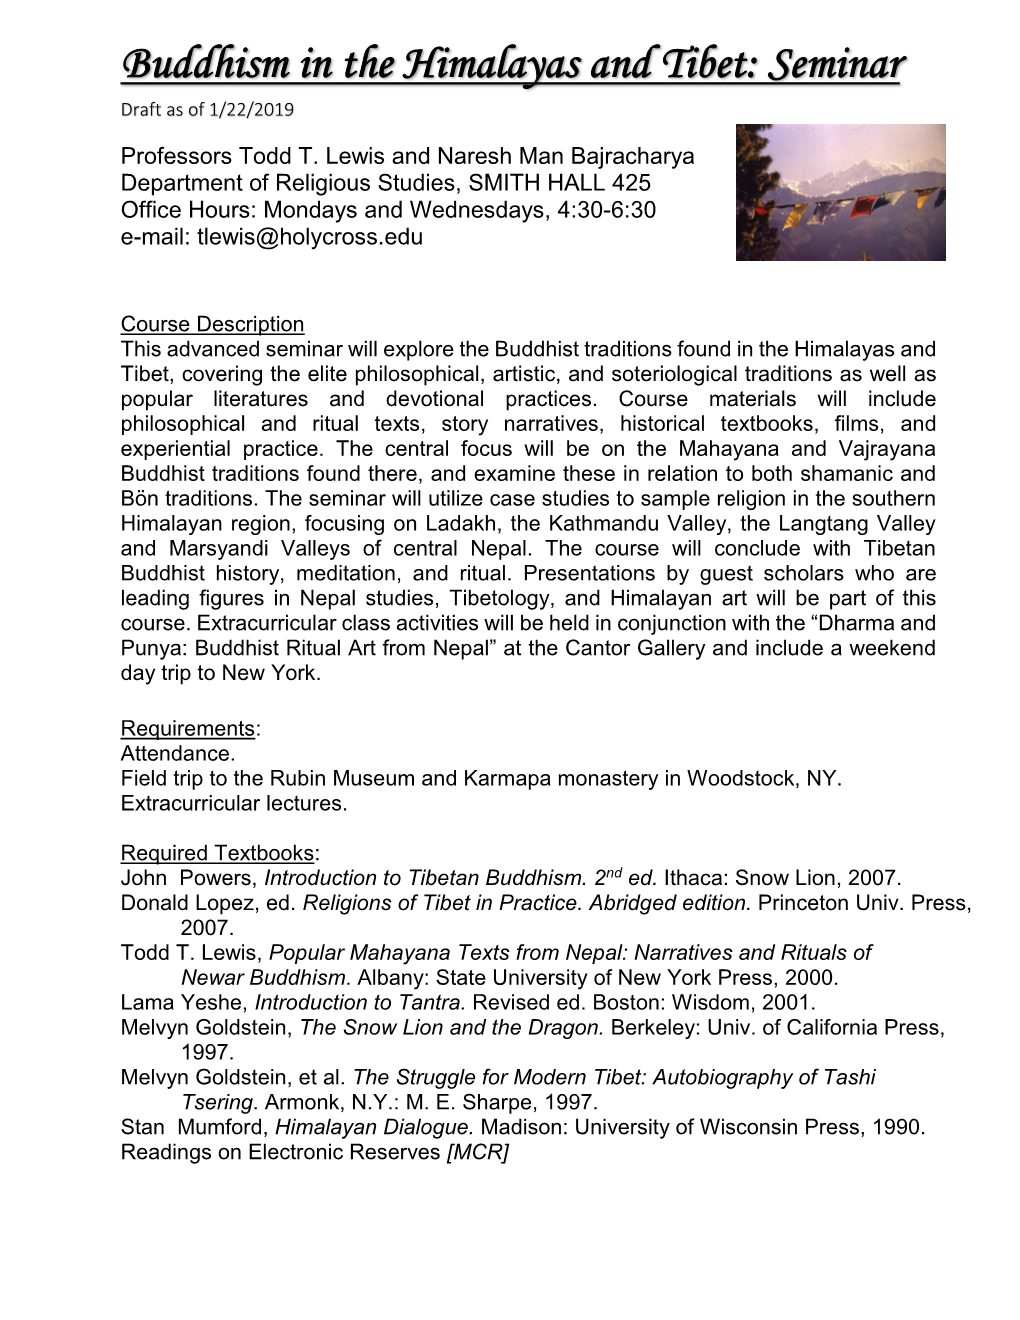 Buddhism in the Himalayas and Tibet: Seminar Draft As of 1/22/2019